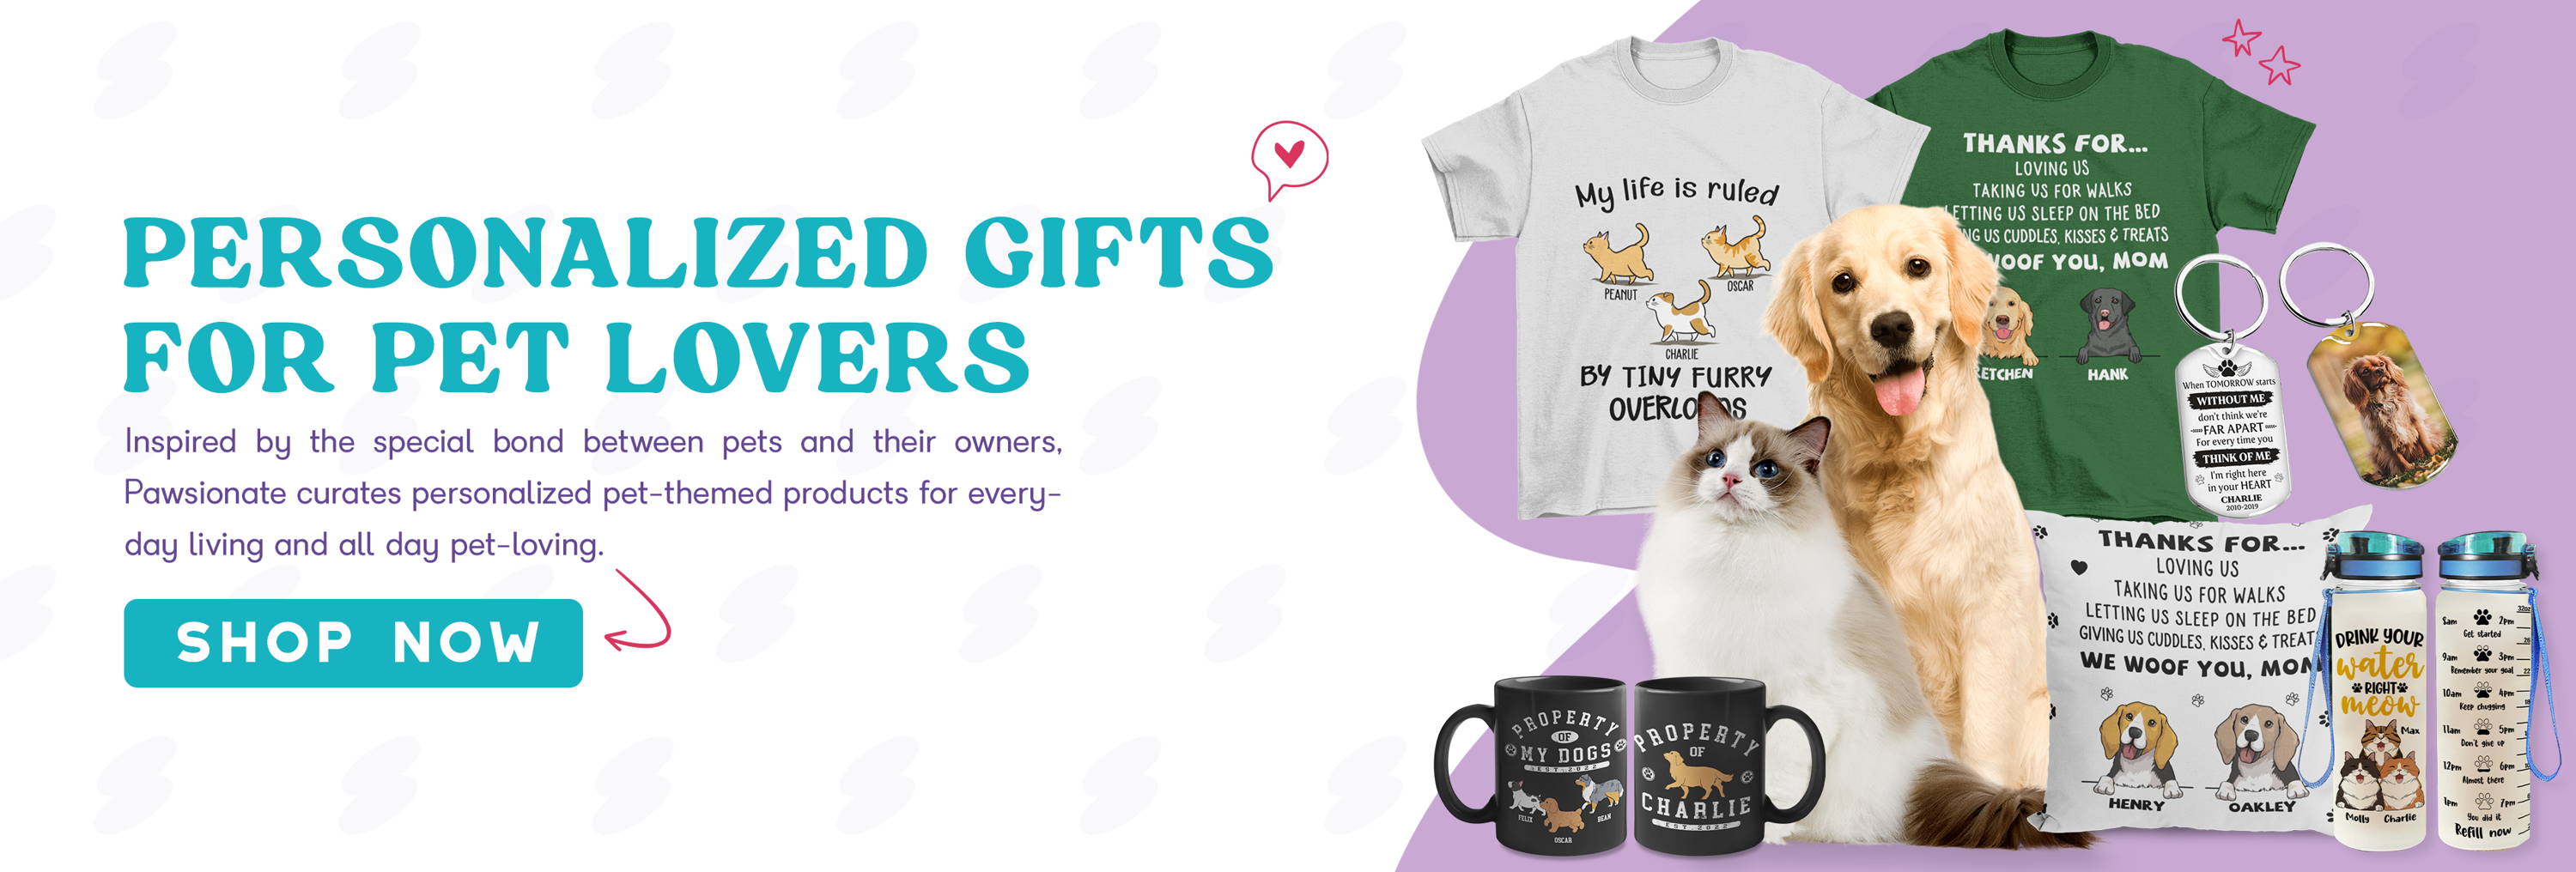 Personalized Gifts For Pet Lovers